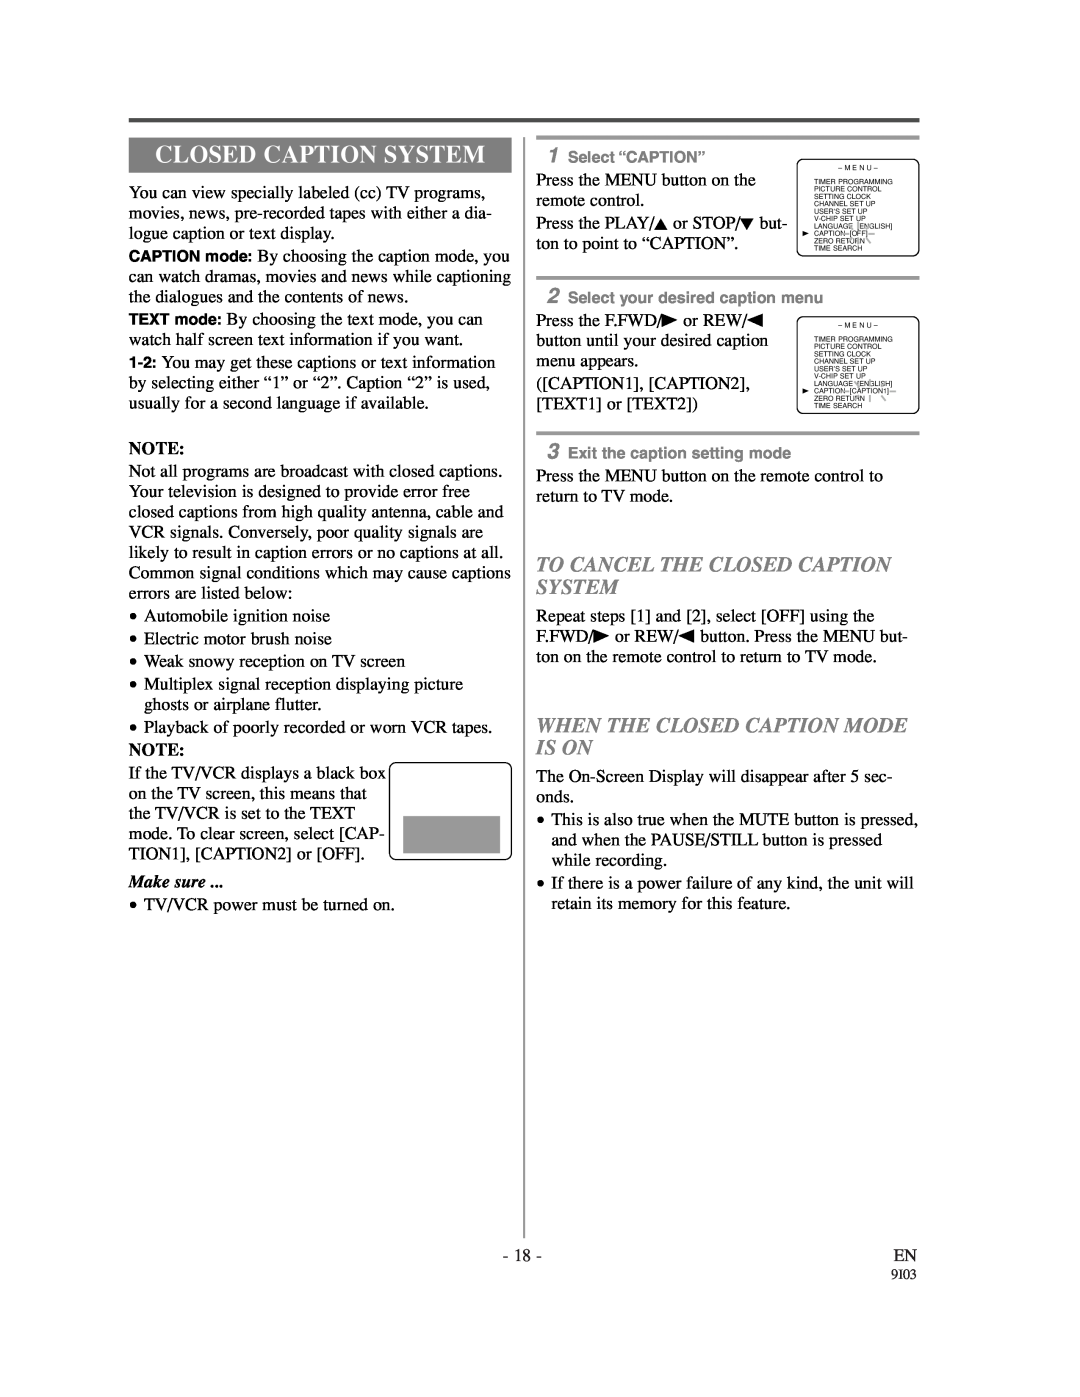 Emerson EC1320C owner manual To Cancel The Closed Caption System, When The Closed Caption Mode Is On 